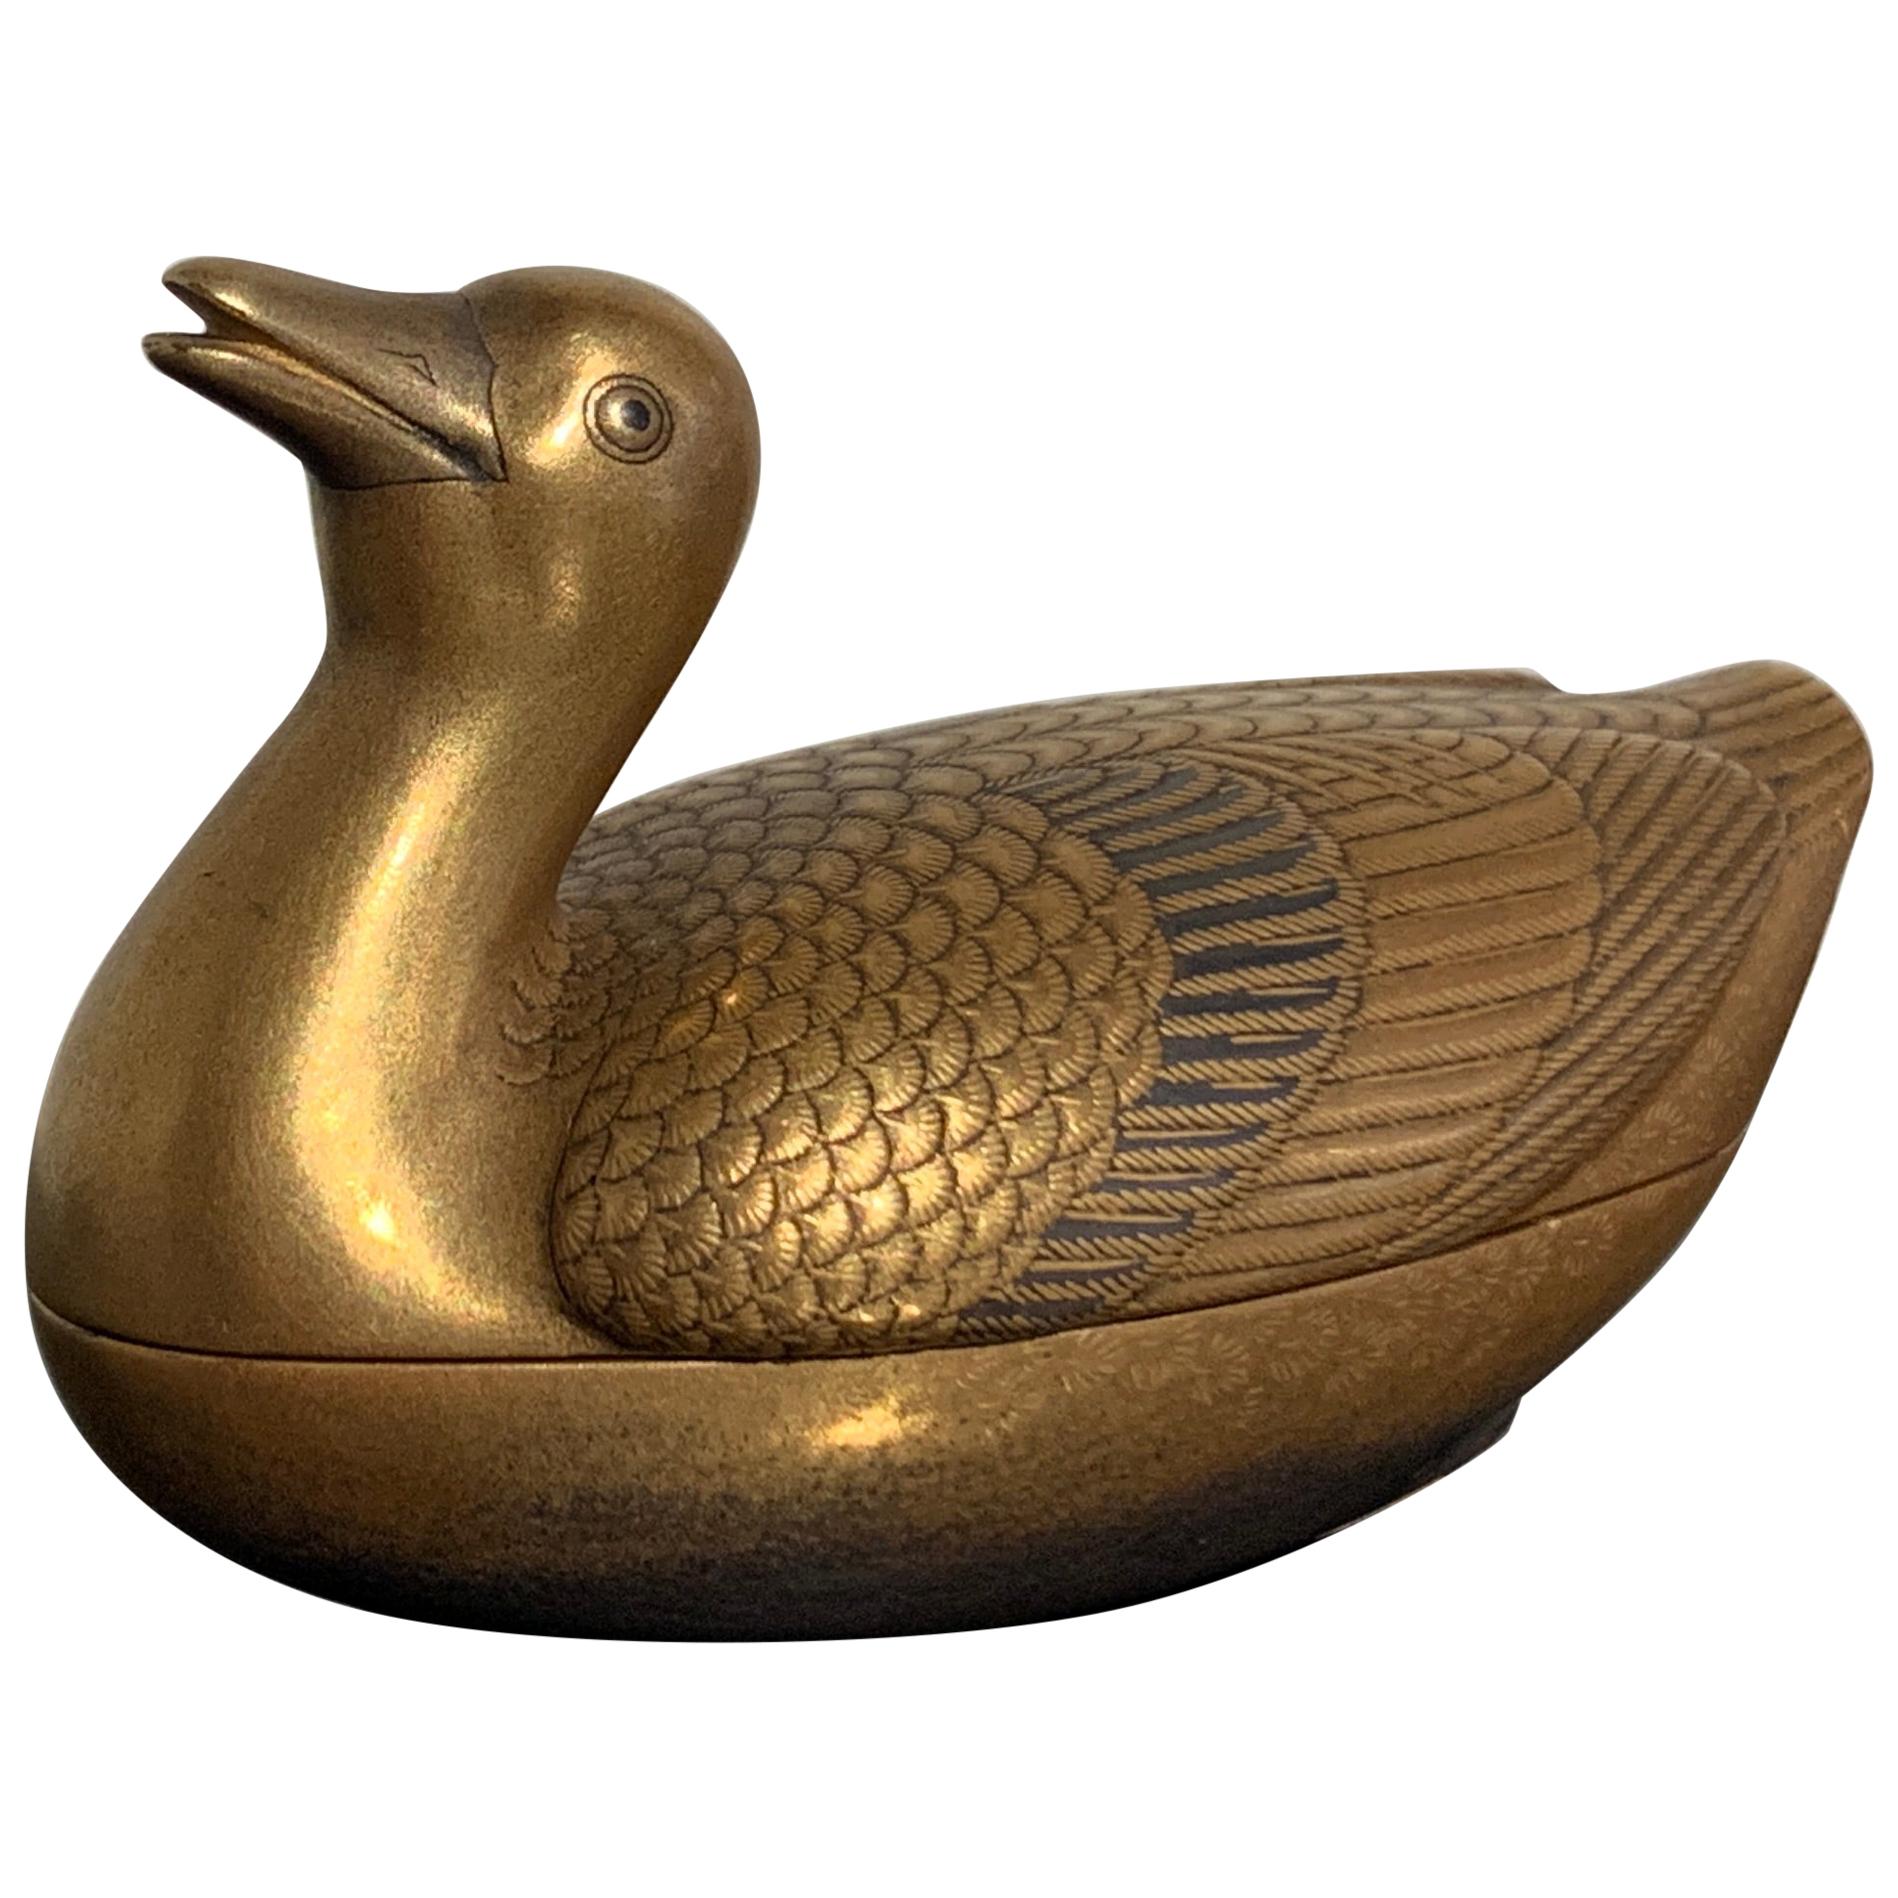 Small Japanese Lacquer Duck Incense Box, Kogo, Meiji Period, Late 19th Century For Sale